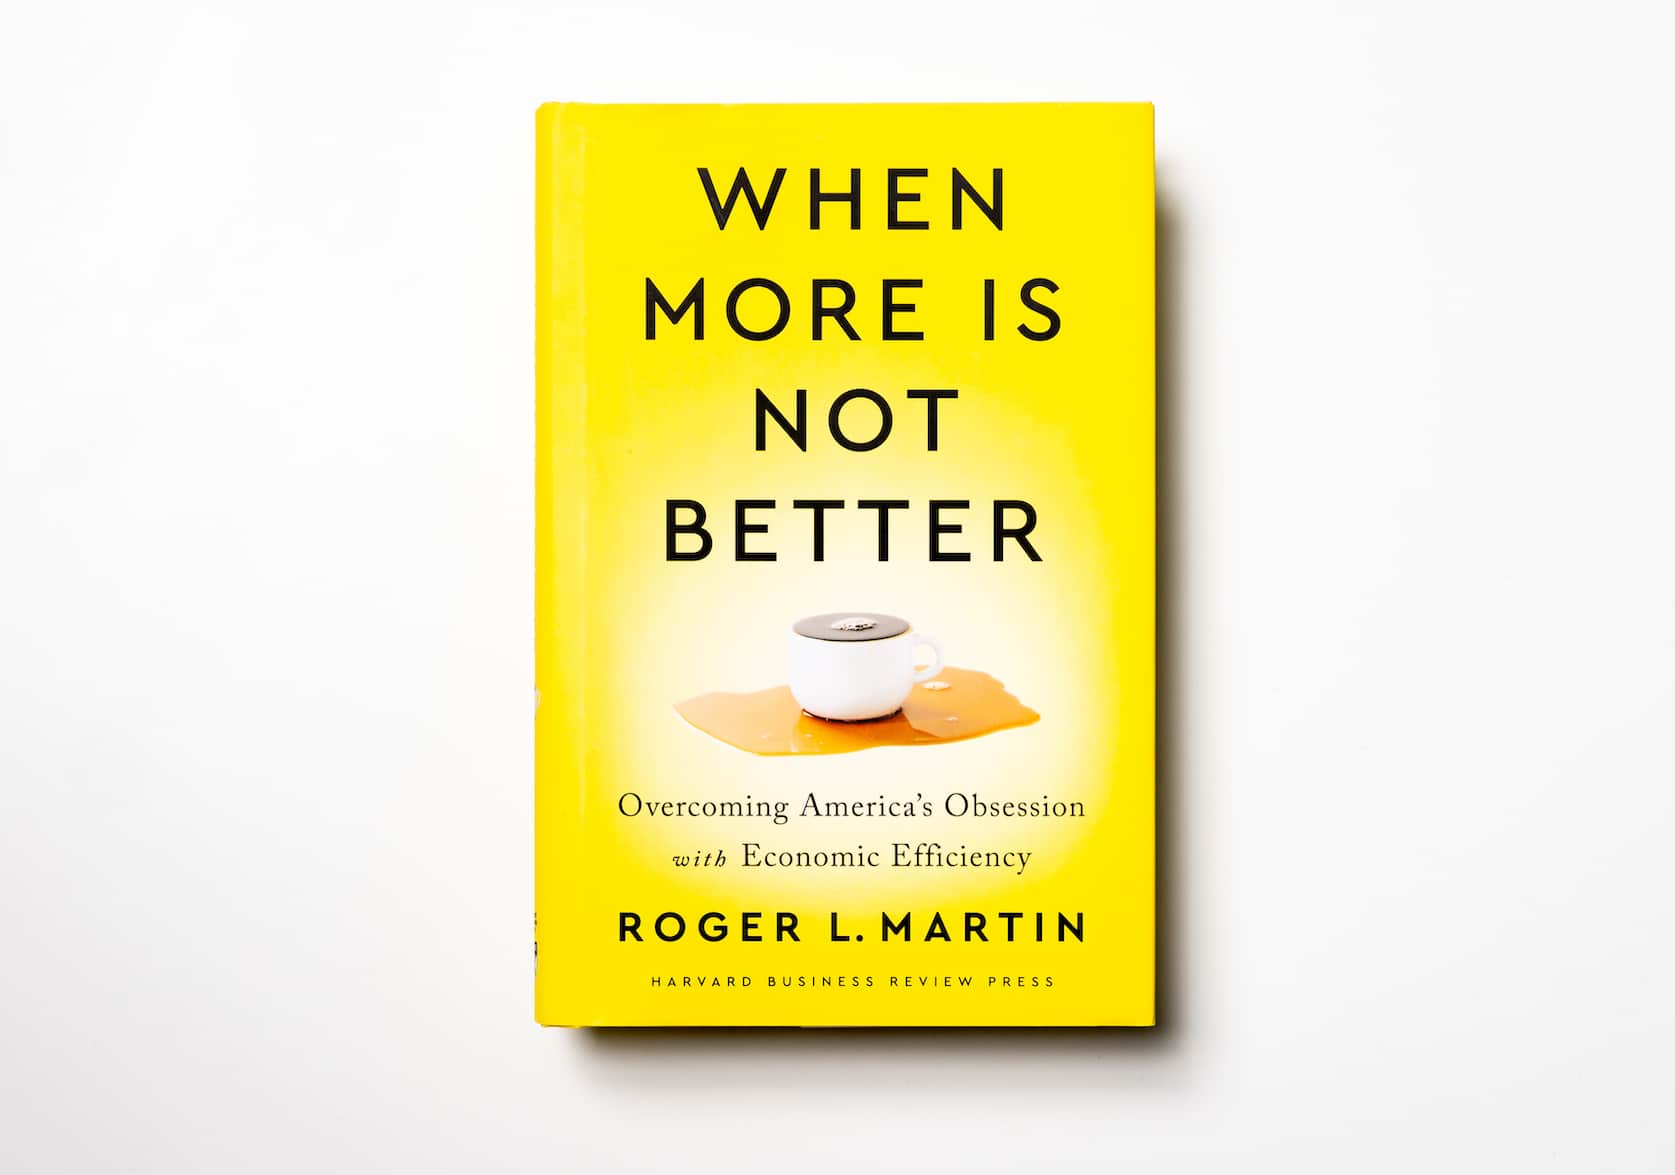 When more is not better: Overcoming America's Obsession with Economic Efficiency by Roger L. Martin, Harvard Business Review Press